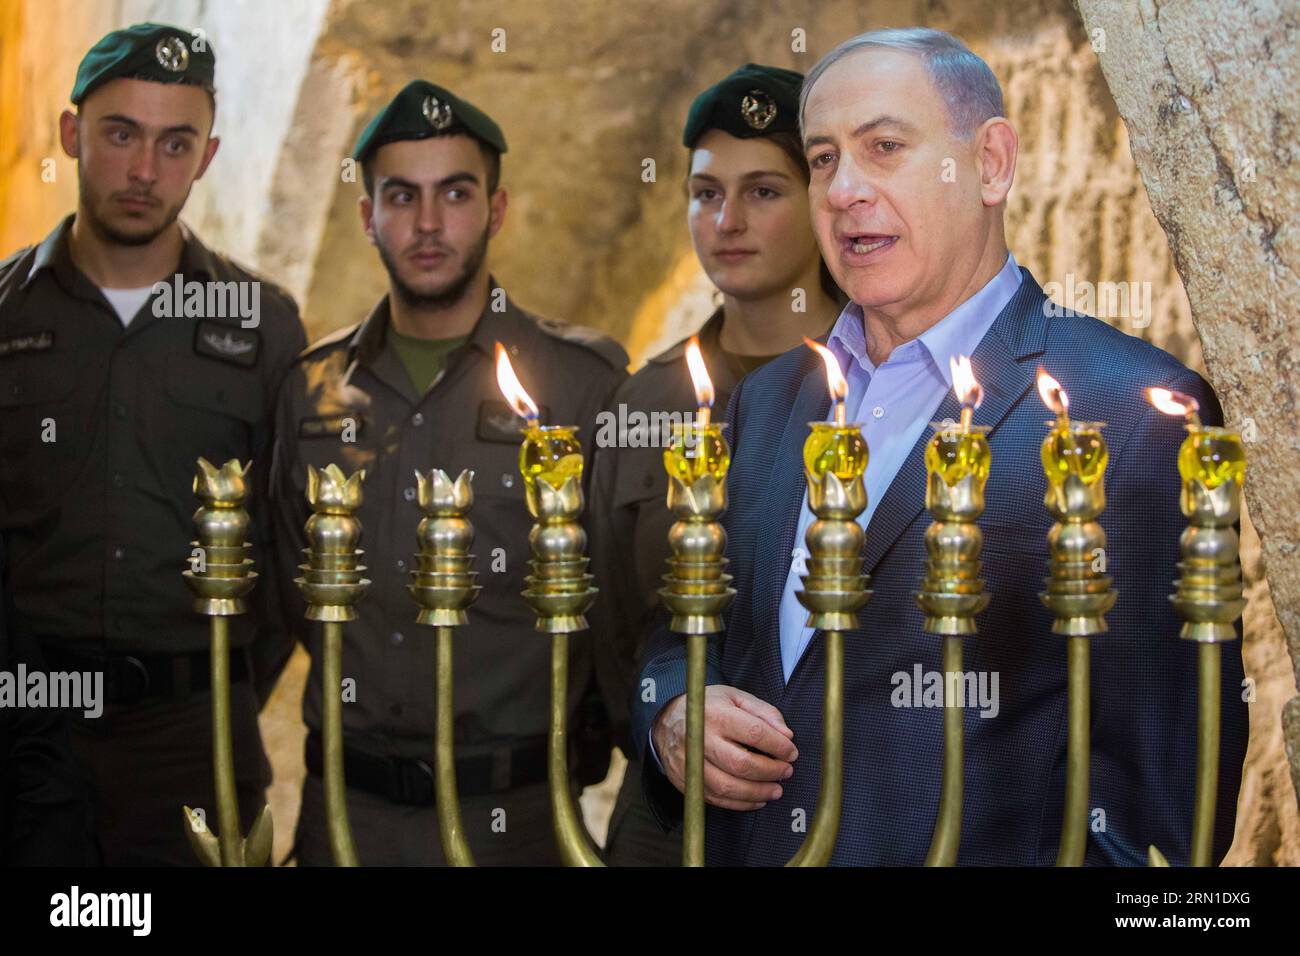 Israeli Prime Minister Benjamin Netanyahu (1st R) attends a ceremony to mark the fifth night of Hanukkah at the Western Wall in the Old City of Jerusalem, on Dec. 20, 2014. Hanukkah, also known as the Festival of Lights and Feast of Dedication, is an eight-day Jewish holiday commemorating the rededication of the Holy Temple (the Second Temple) in Jerusalem at the time of the Maccabean Revolt against the Seleucid Empire of the 2nd Century B.C. Hanukkah is observed for eight nights and days, starting on the 25th day of Kislev according to the Hebrew calendar, which may occur at any time from lat Stock Photo